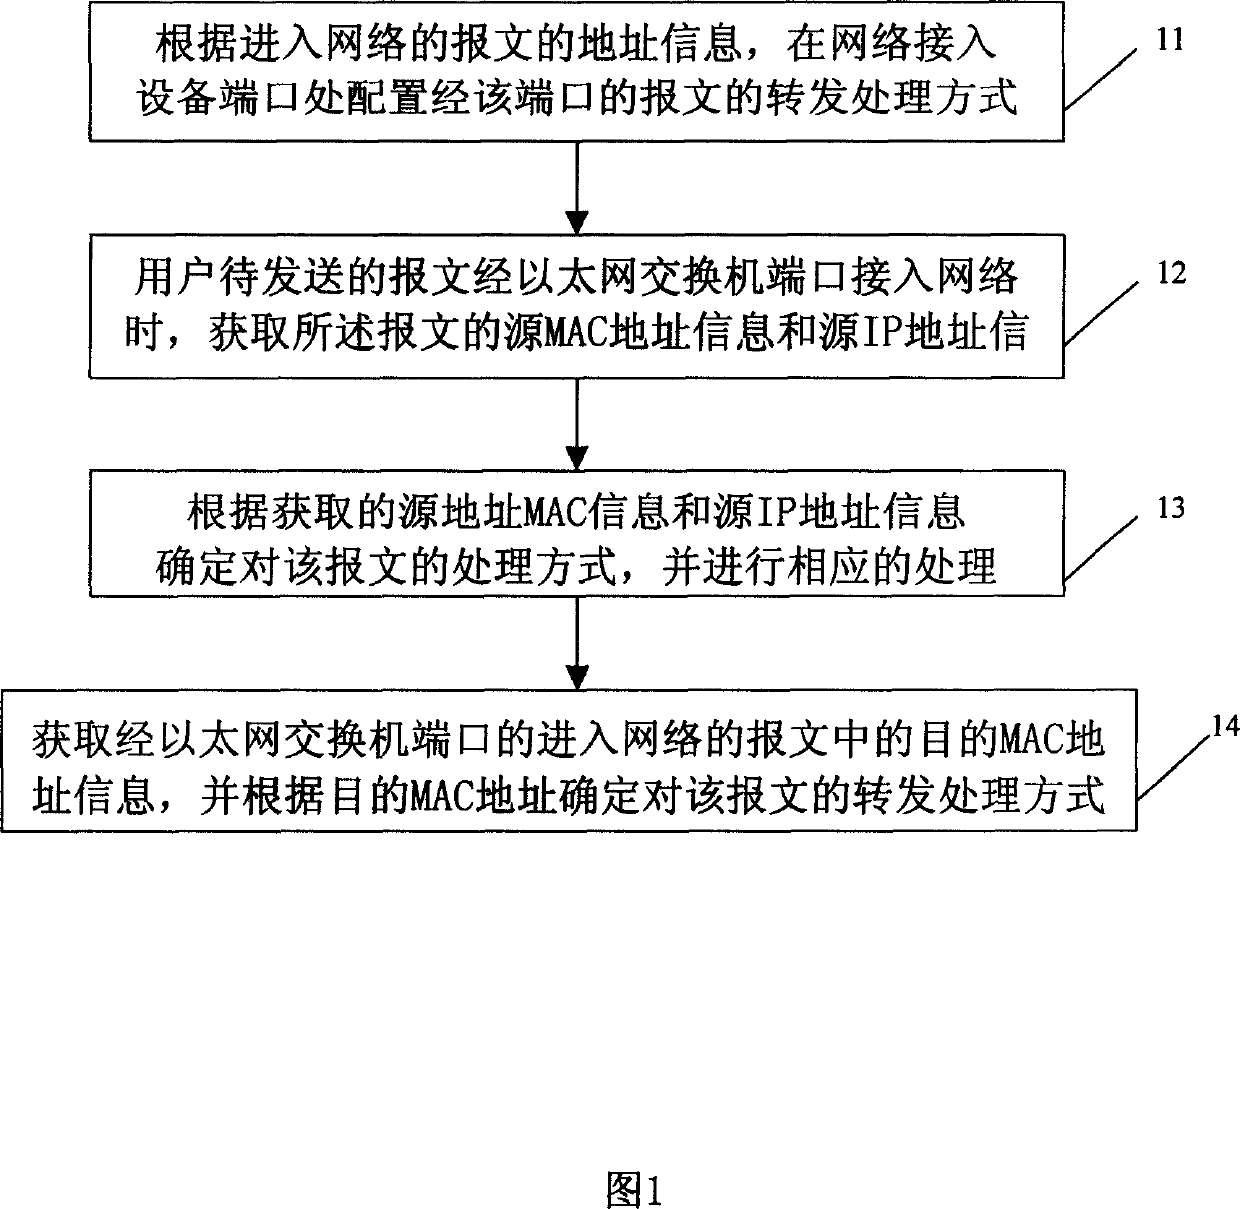 Port based network access control method